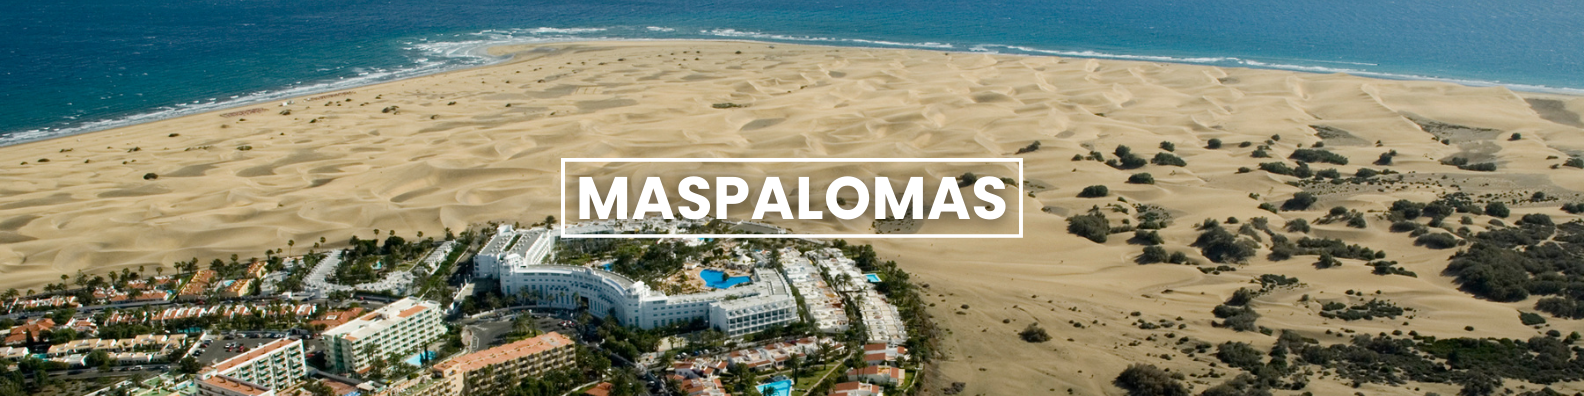 an aerial view of a beach with the words maspalomas written on it .Barter'sTravelnet